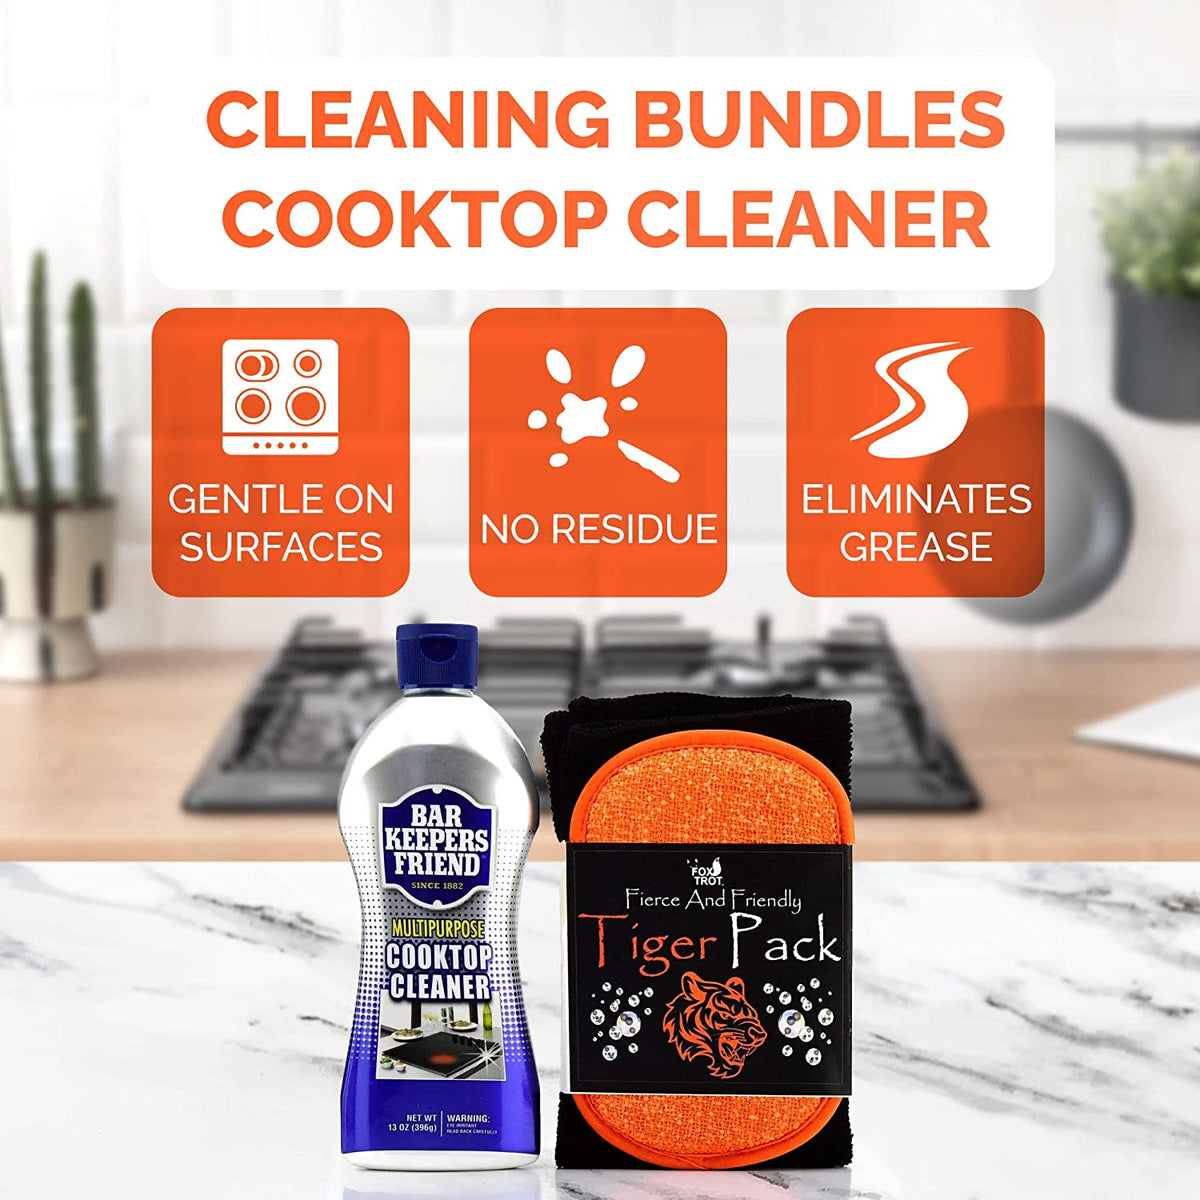 Bar Keepers Friend Cooktop Cleaner Kit by FoxtrotLiving